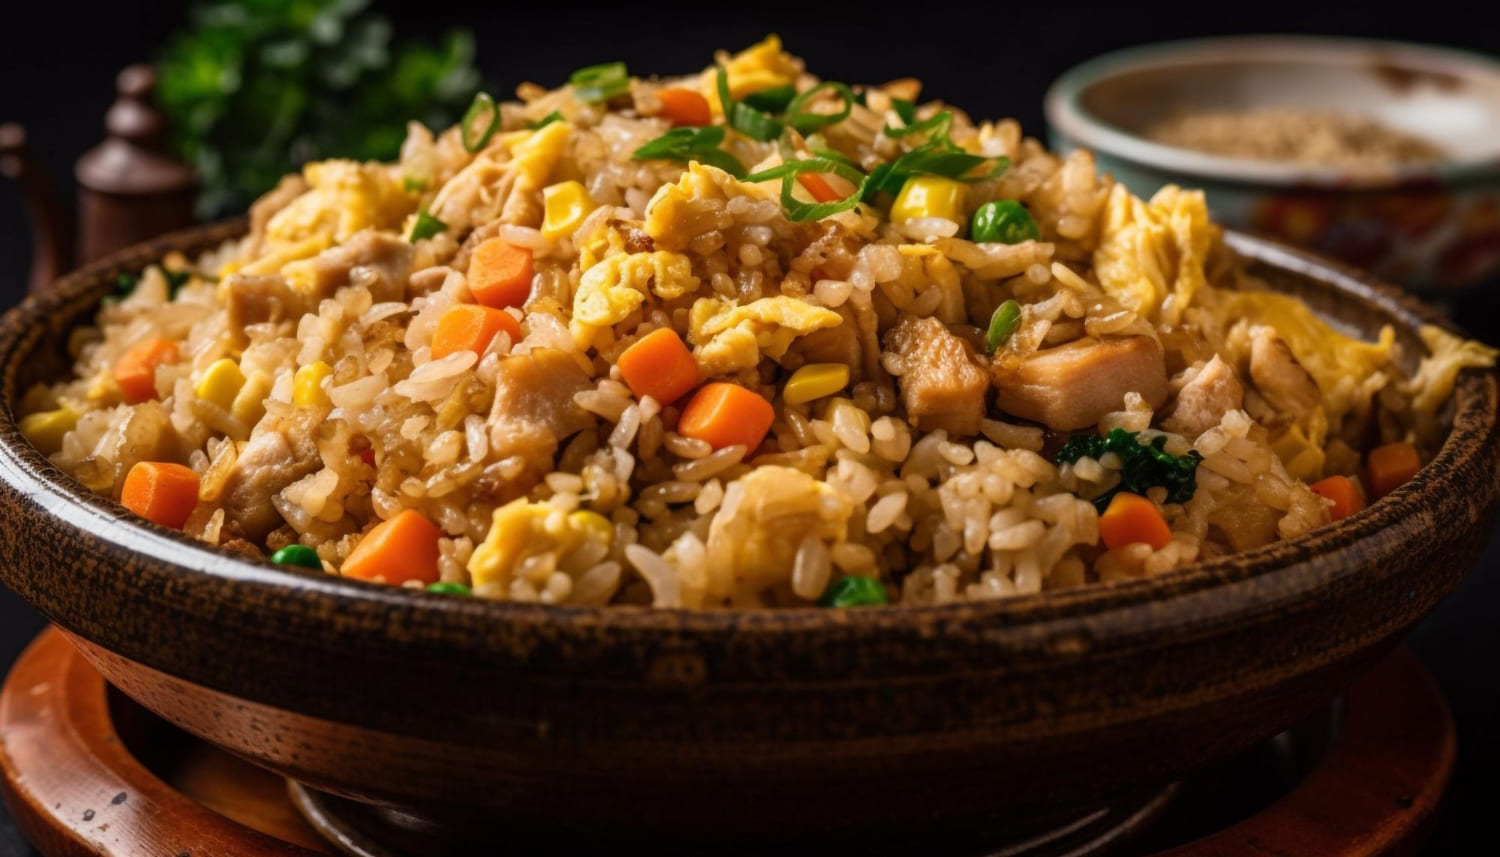 Healthy Stir-Fried Brown Rice with Vegetables